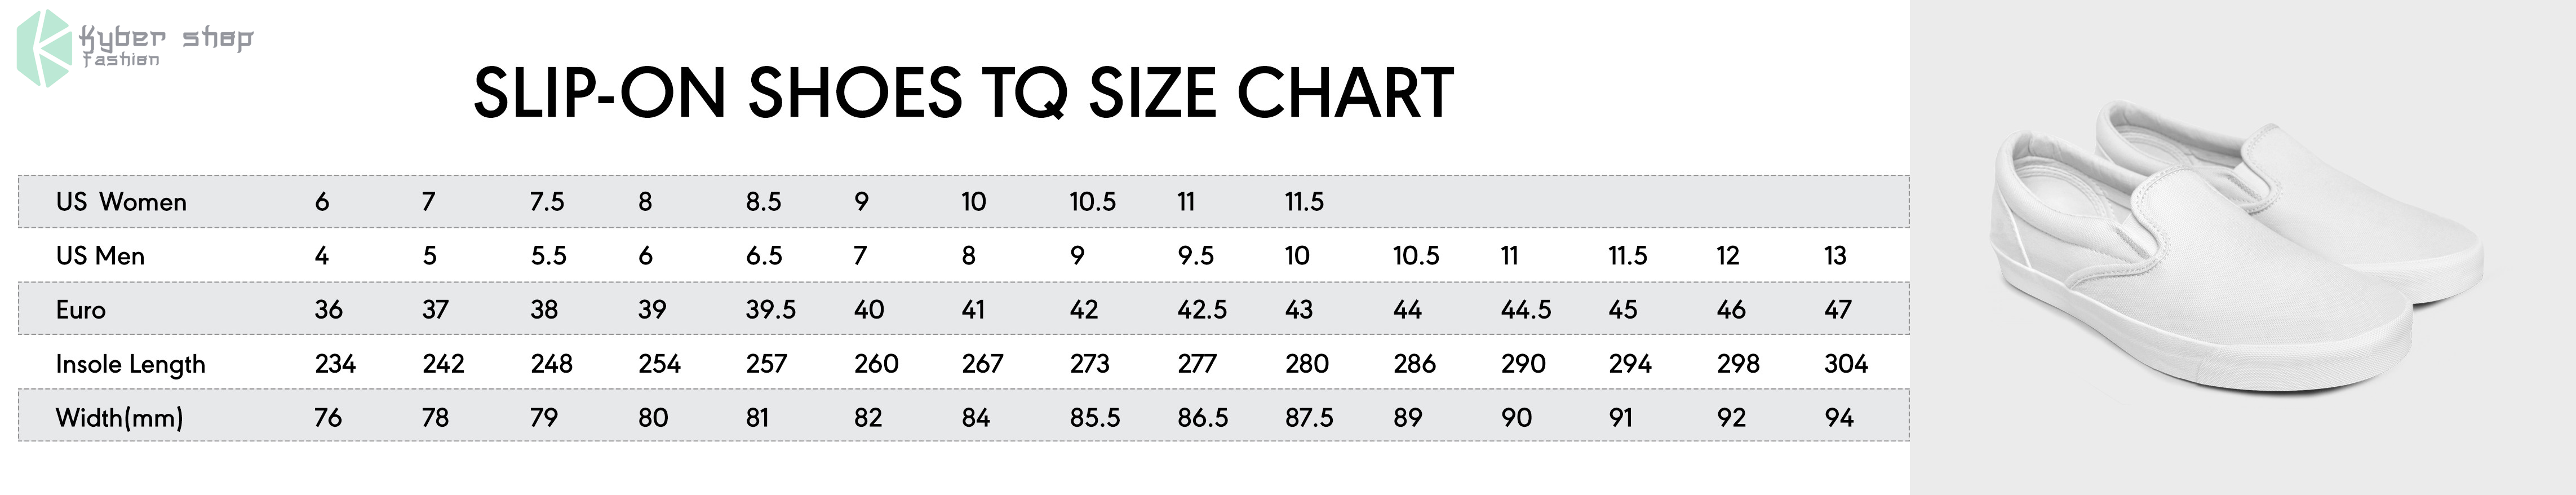 Slip On Shoes Size Chart Kybershop